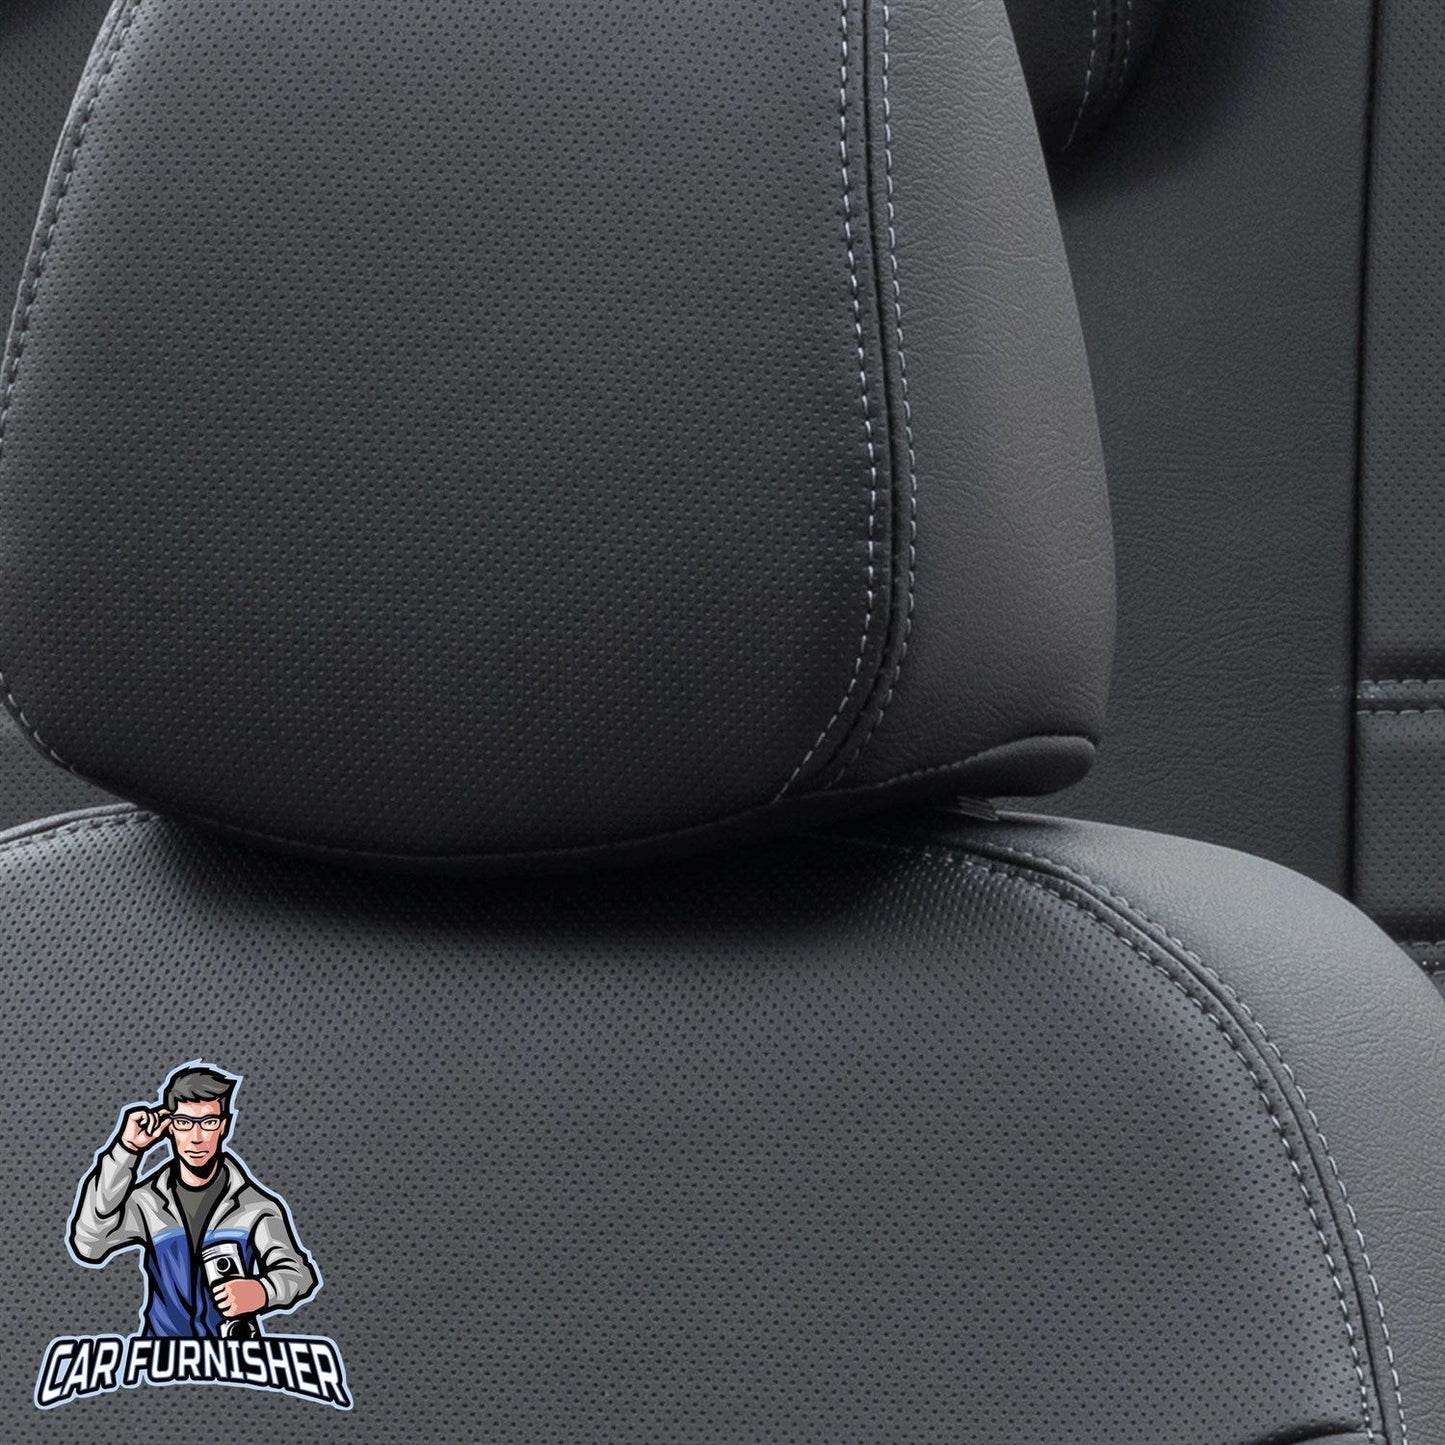 Ford Transit Seat Covers Istanbul Leather Design Black Leather